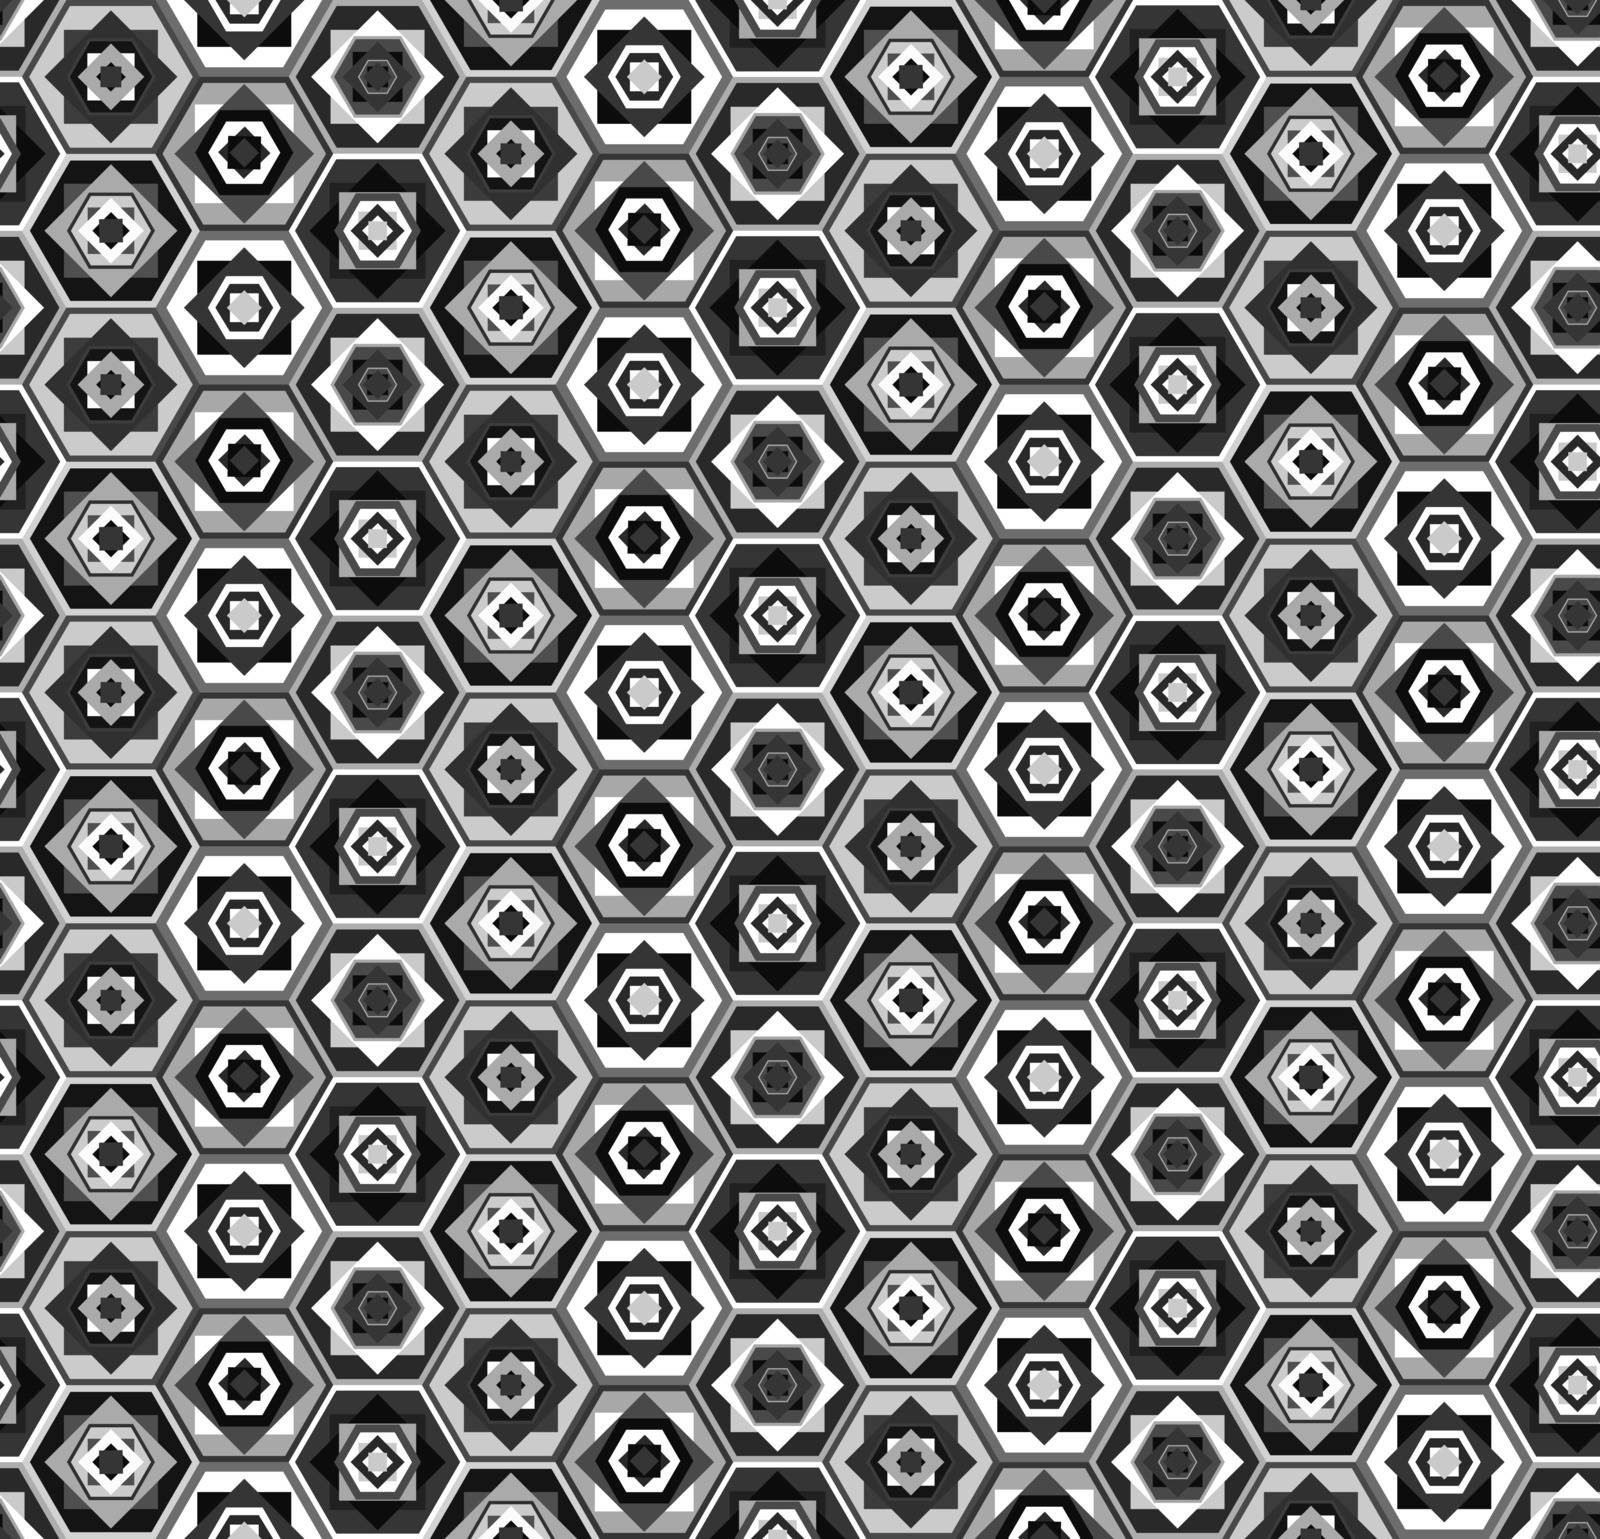 Seamless gray and white pattern with hexagons